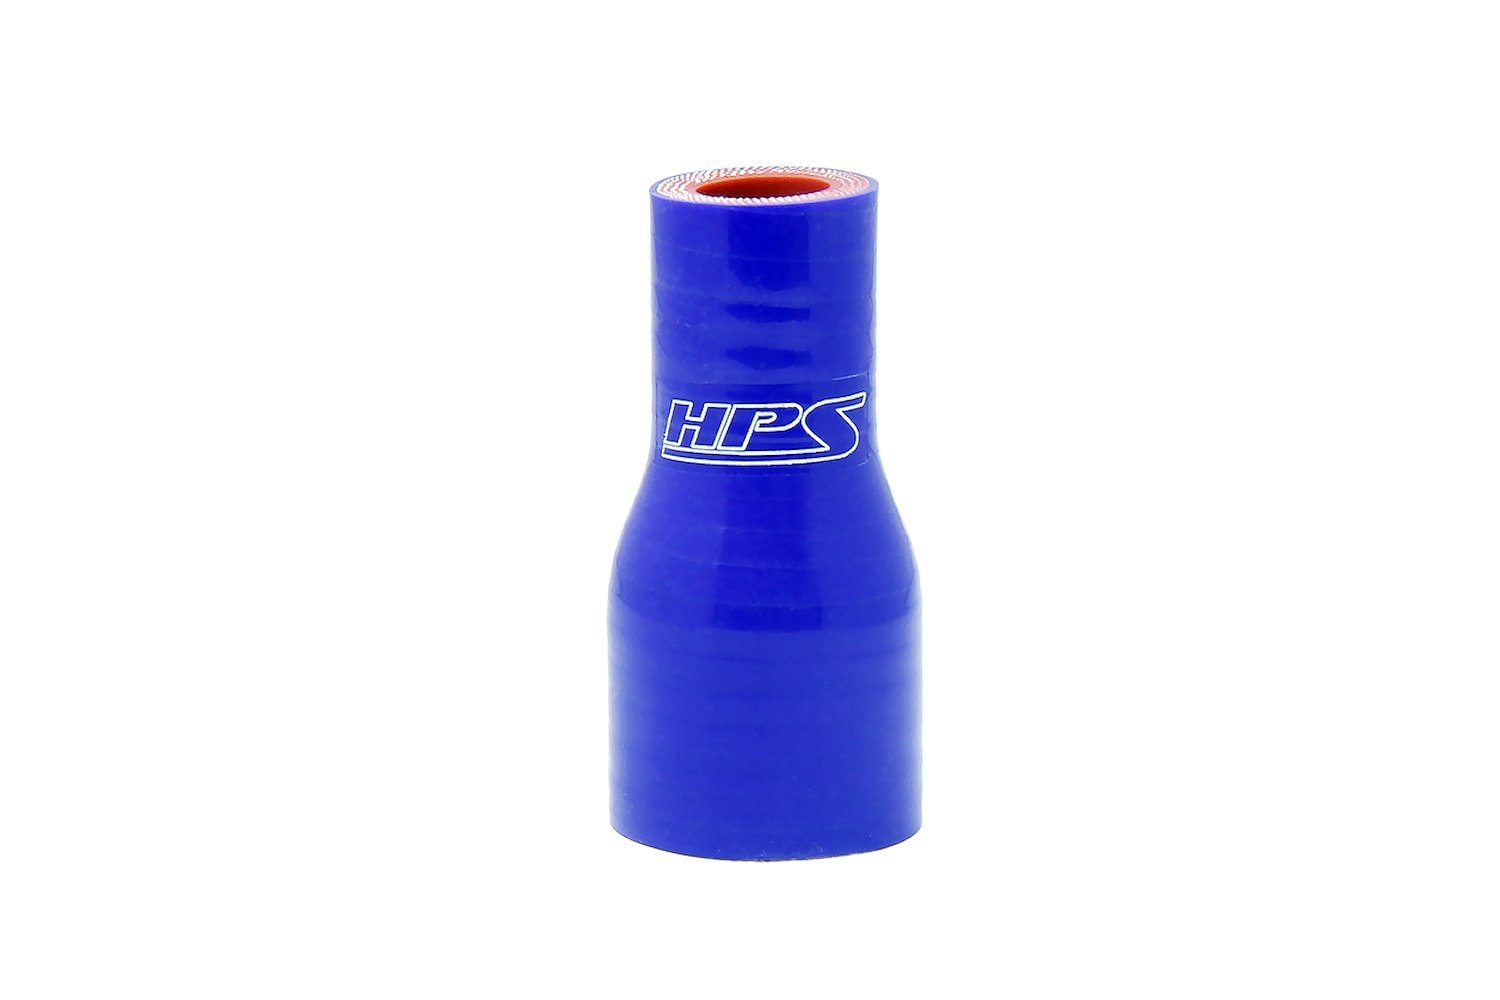 HTSR-138-175-BLUE Silicone Reducer Hose, High-Temp 4-Ply Reinforced, 1-3/8 in. - 1-3/4 in. ID, 3 in. Long, Blue